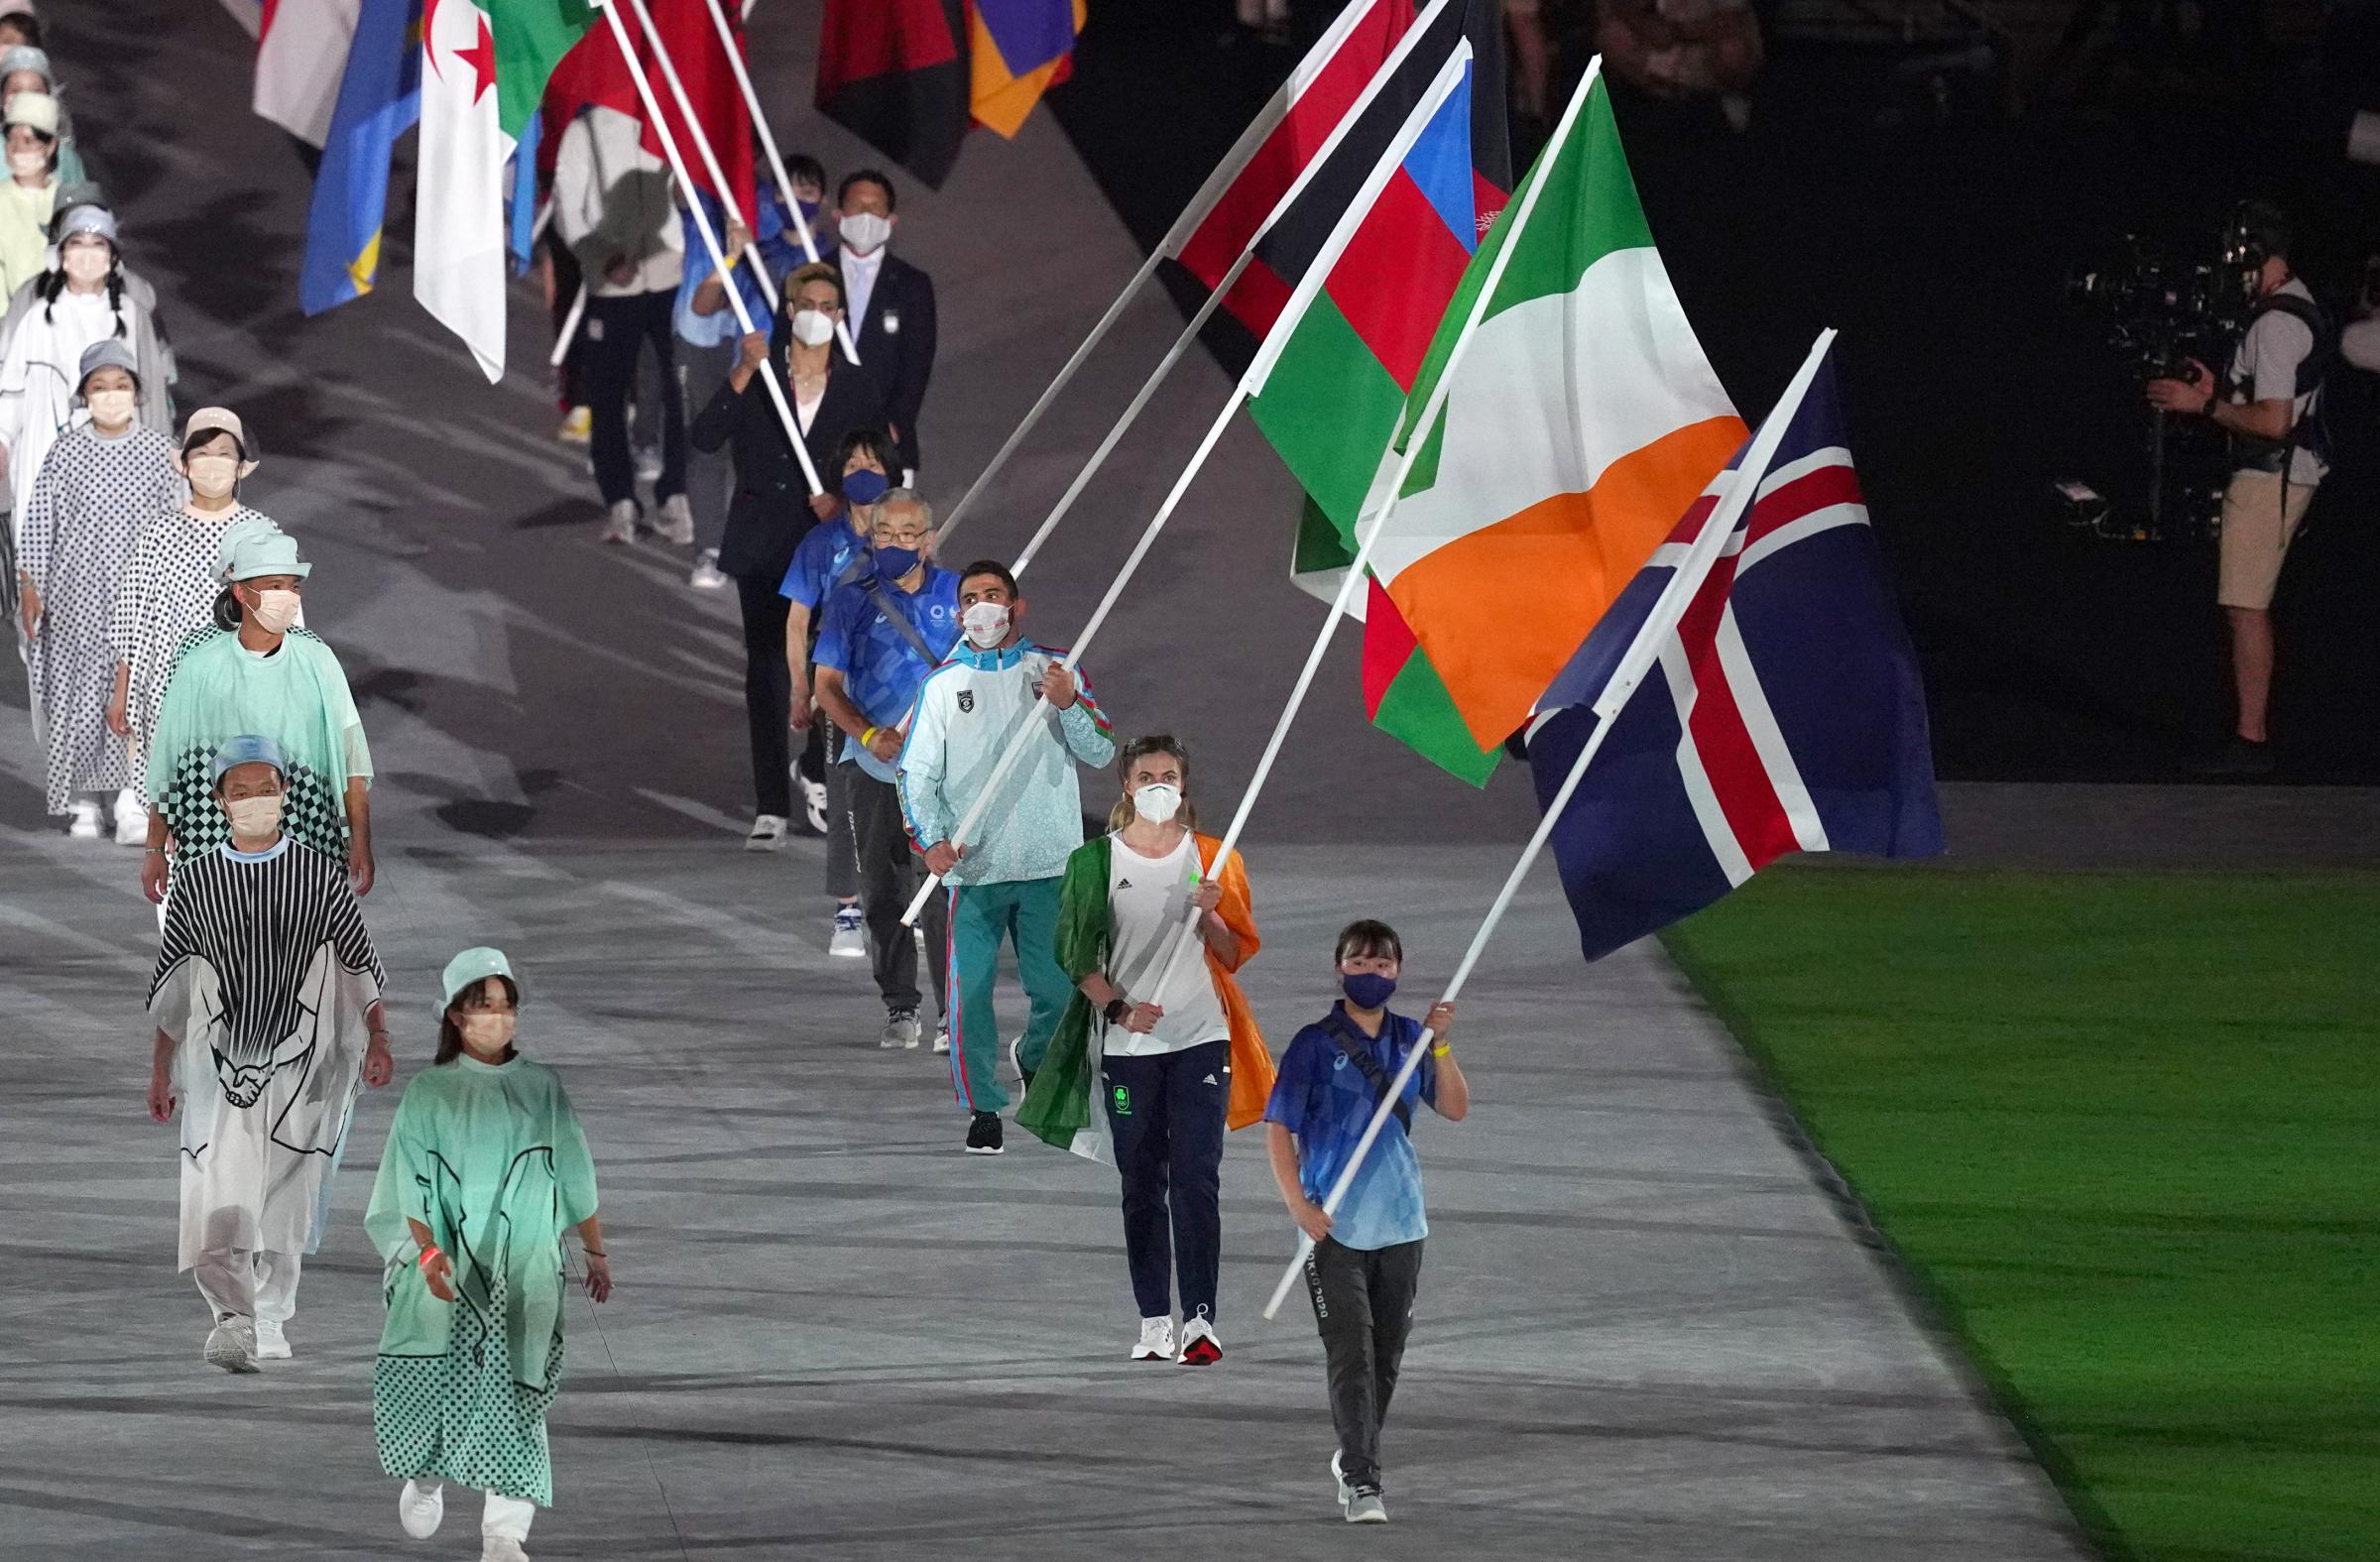 Irelands Natalya Coyle with the tricolour flag during the closing ceremony of the Tokyo 2020 Olympic Games at the Olympic stadium in Japan. Picture date: Sunday August 8, 2021.